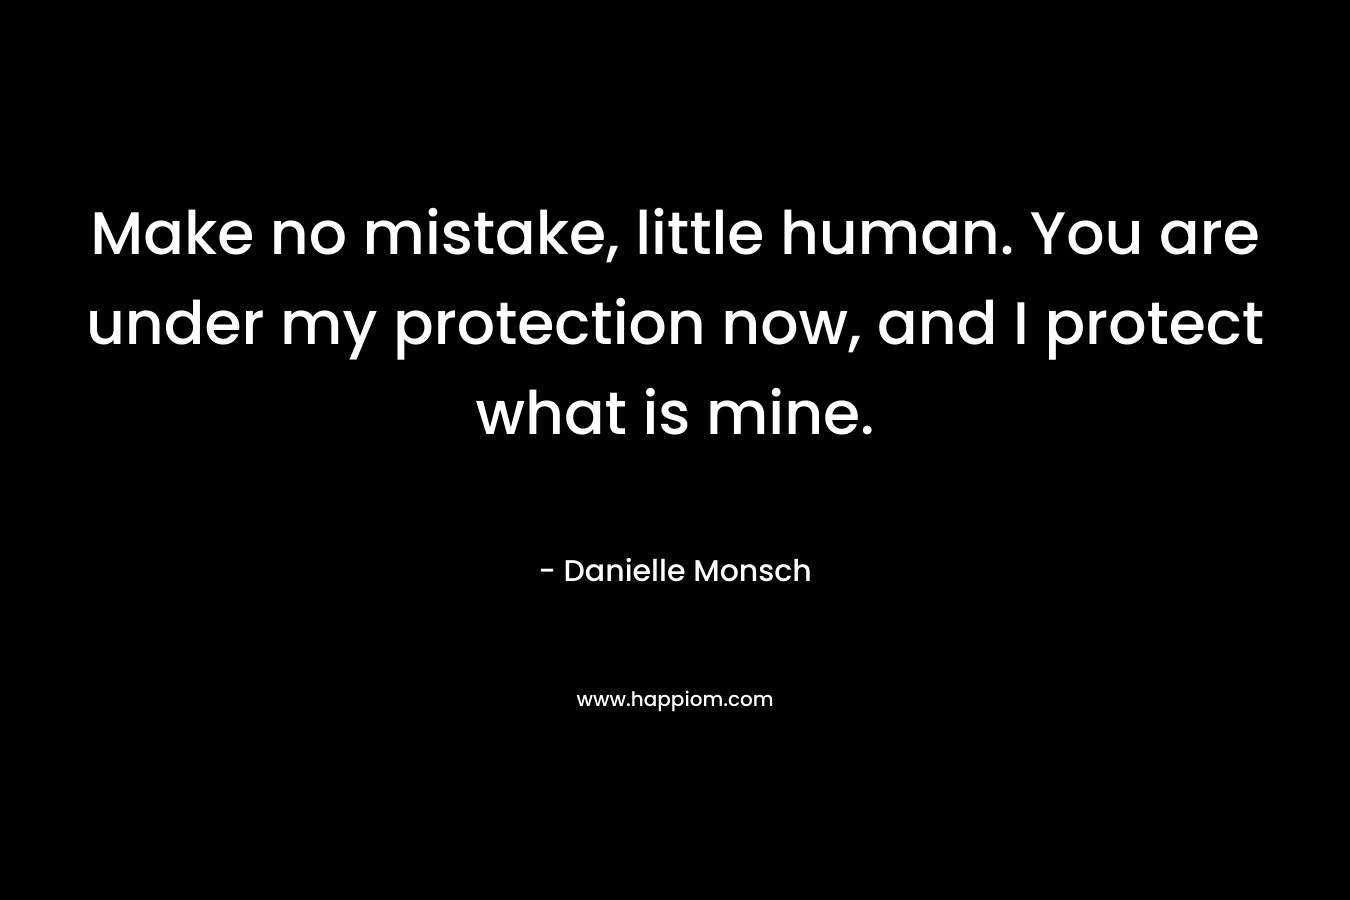 Make no mistake, little human. You are under my protection now, and I protect what is mine. – Danielle Monsch